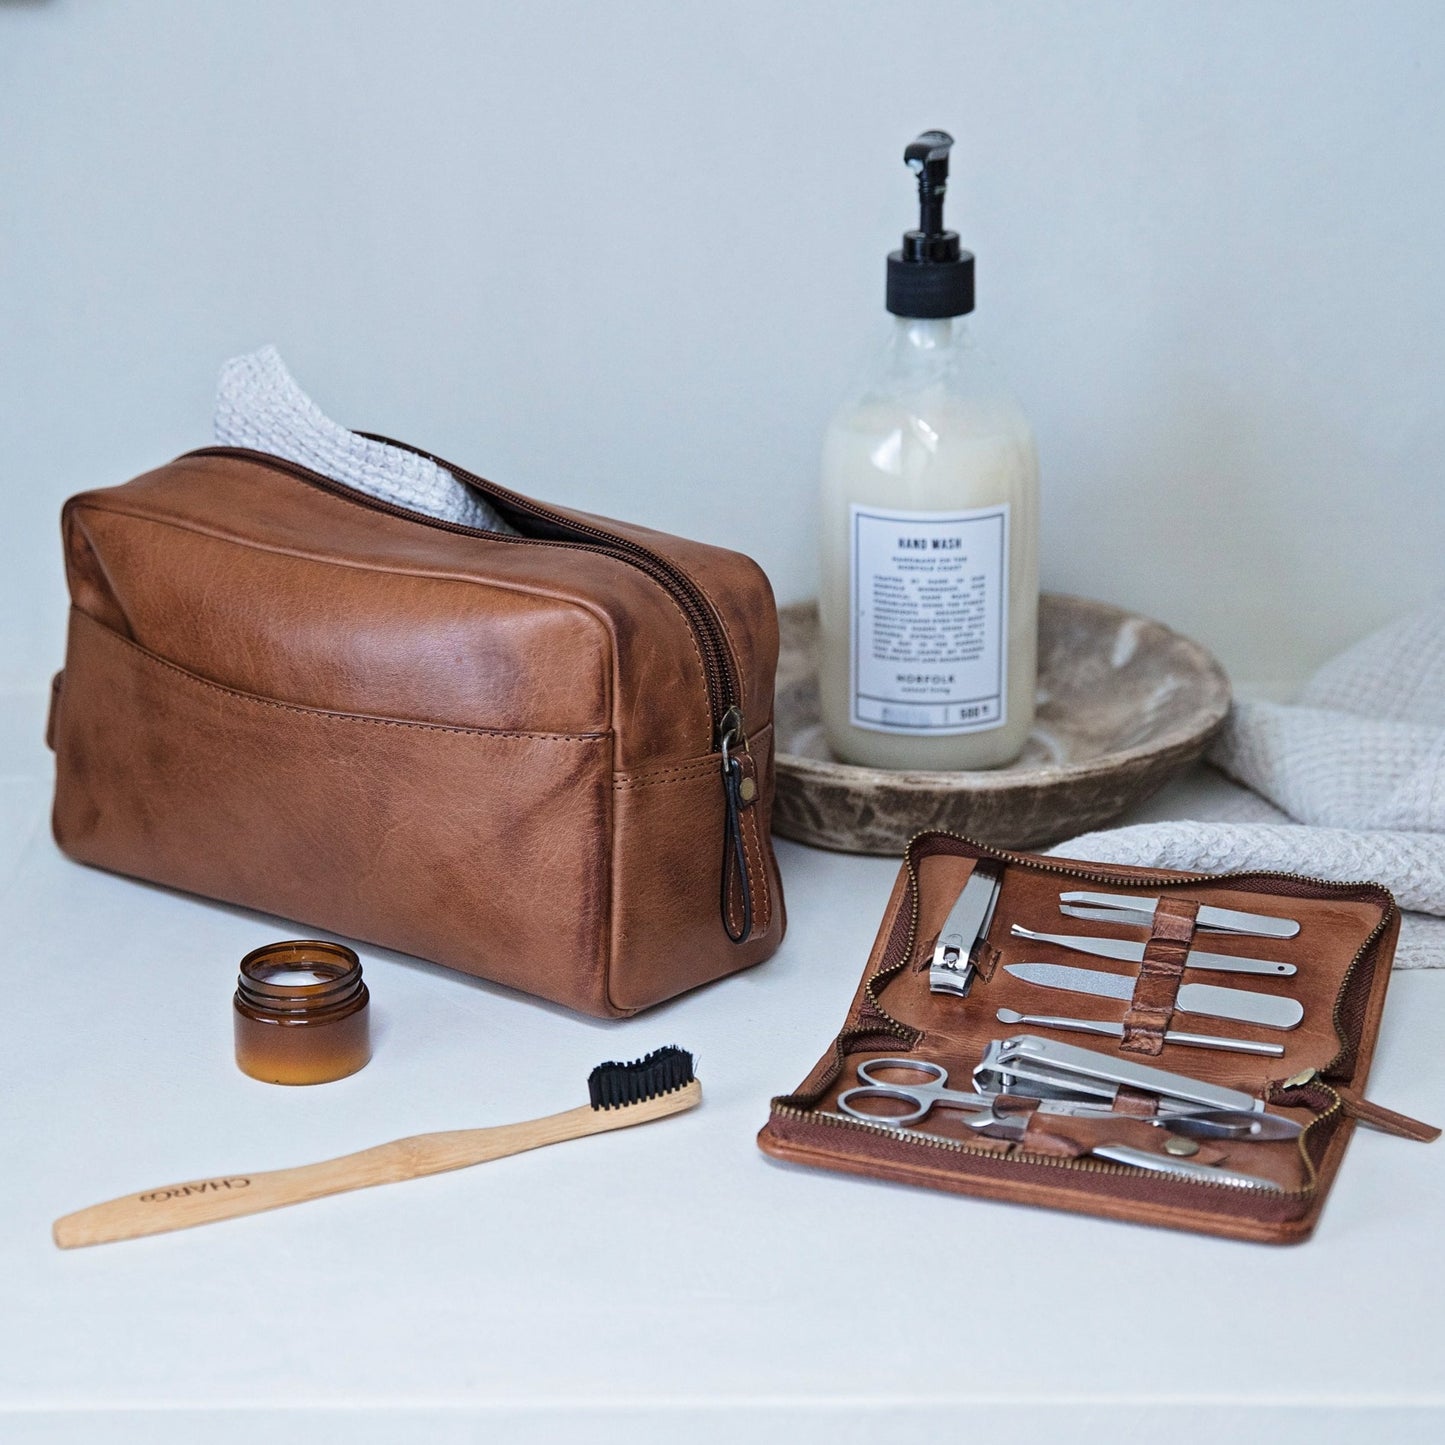 Men’s grooming kit combining a personalised wash bag and men’s manicure set in soft, supple tan leather. Add initials or a name as a thoughtful leather anniversary gift for him or personalised Father’s Day gift.